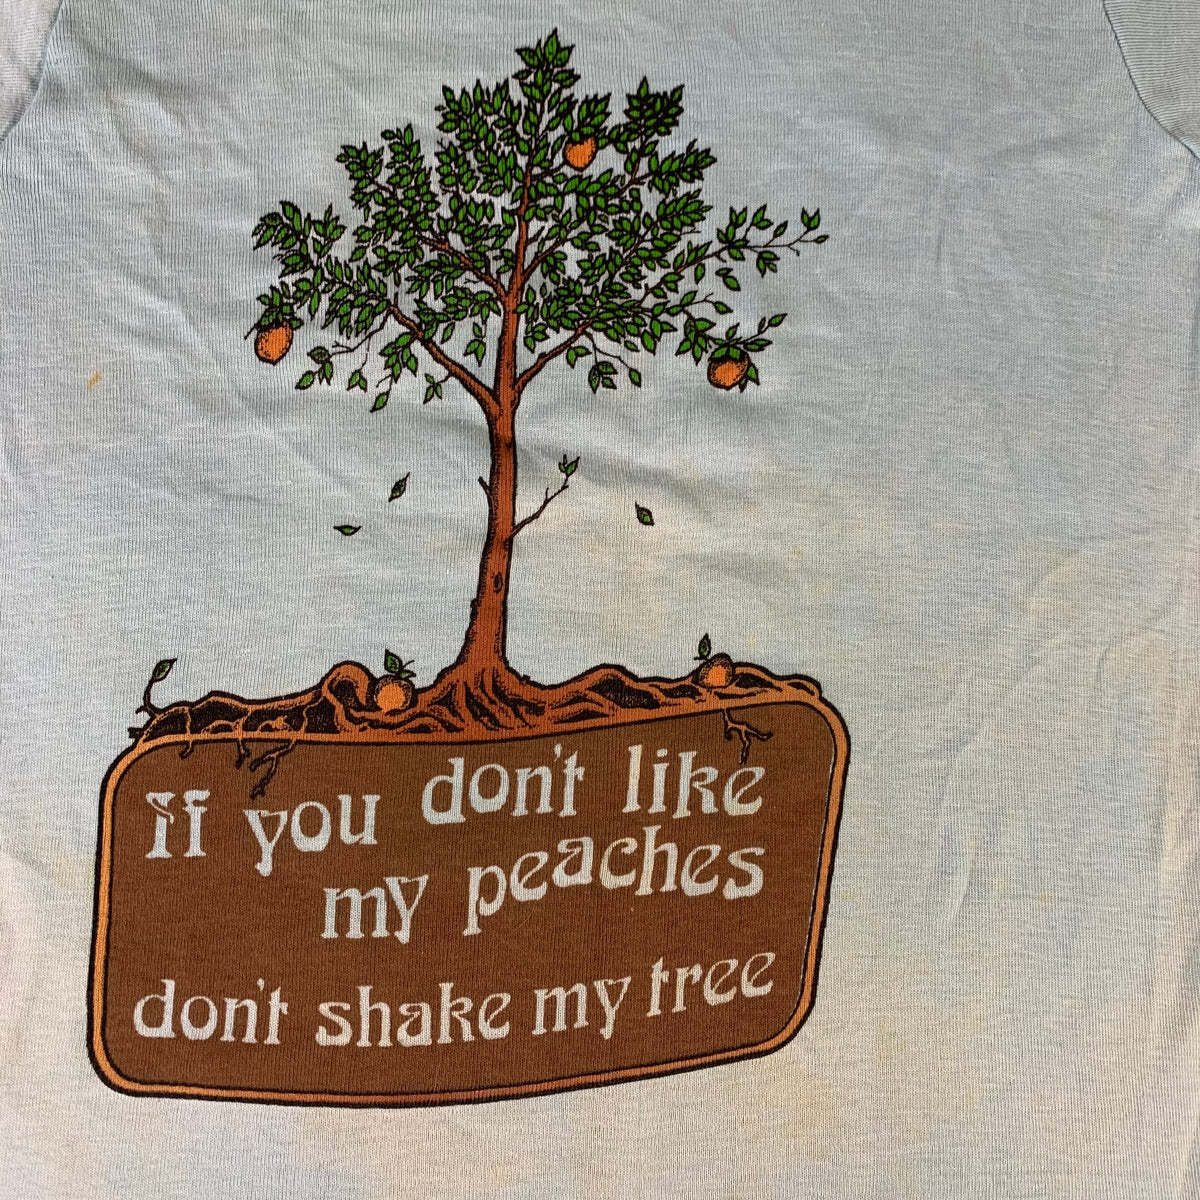 Vintage Peaches &quot;Don&#39;t Shake My Tree&quot; T-Shirt